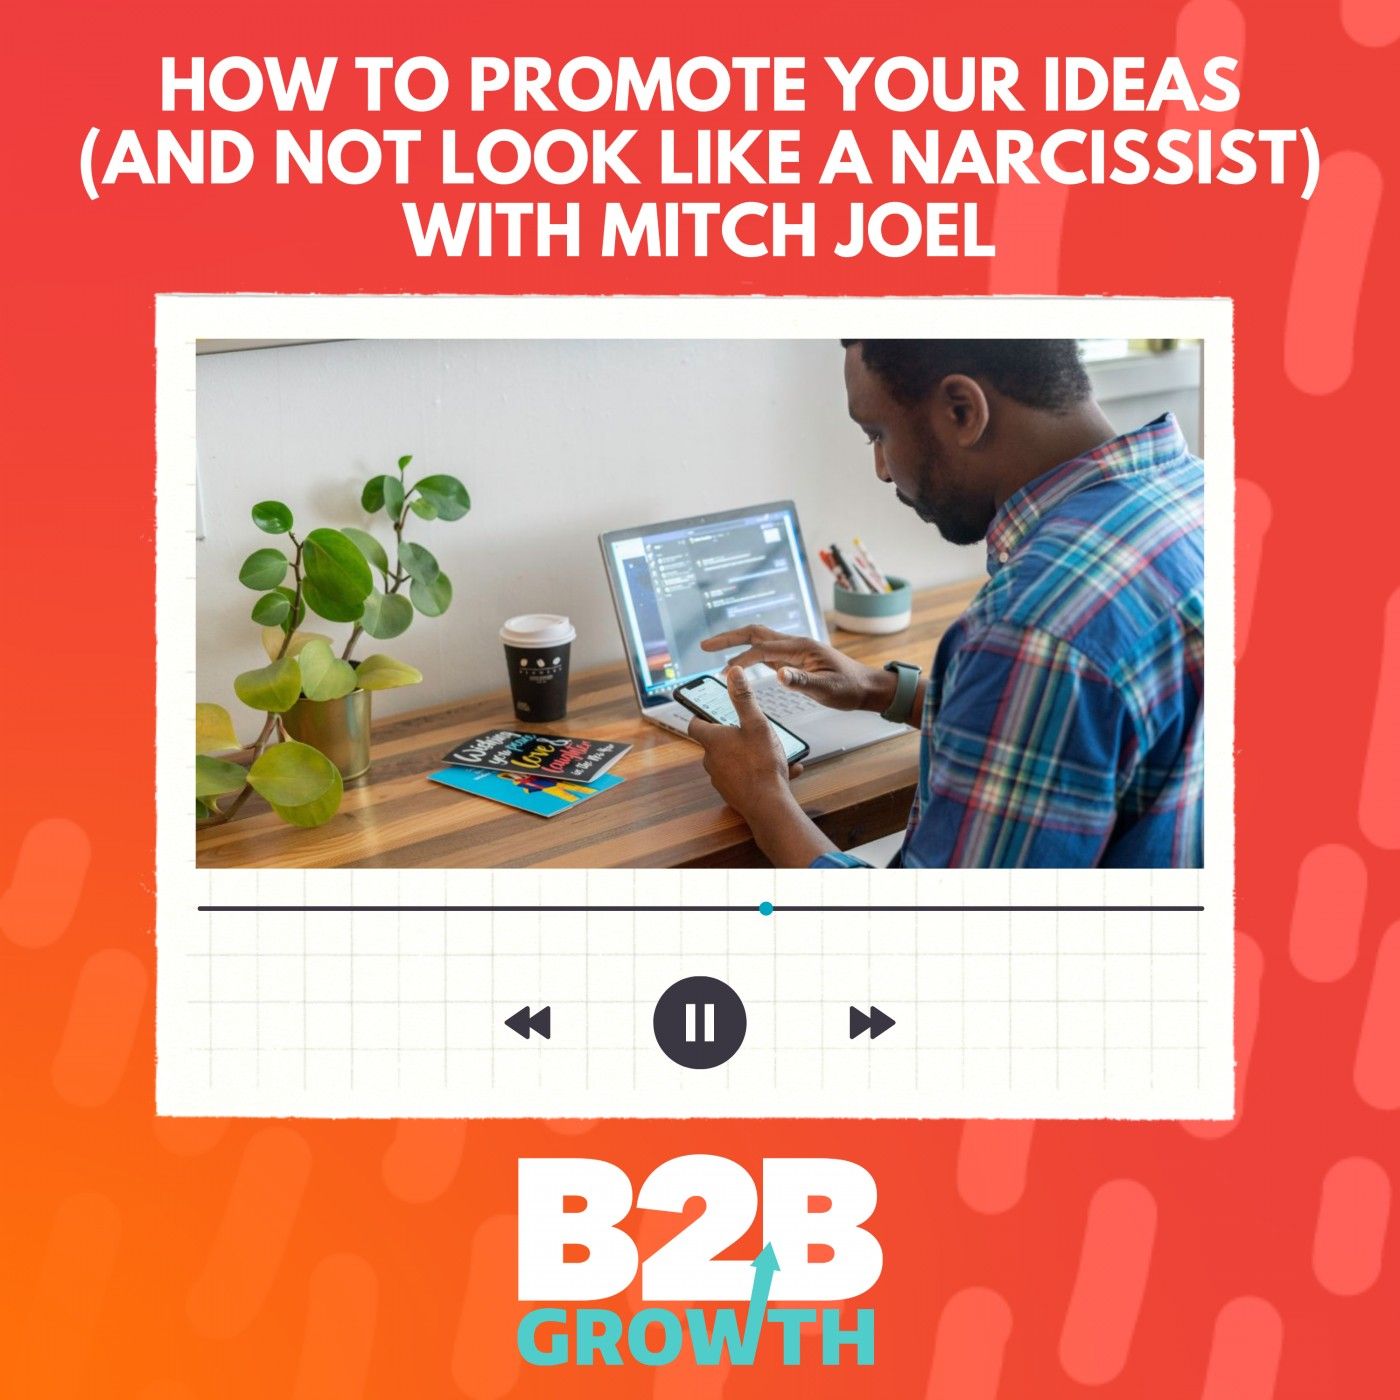 How To Promote Your Ideas (And Not Look Like A Narcissist), with Mitch Joel